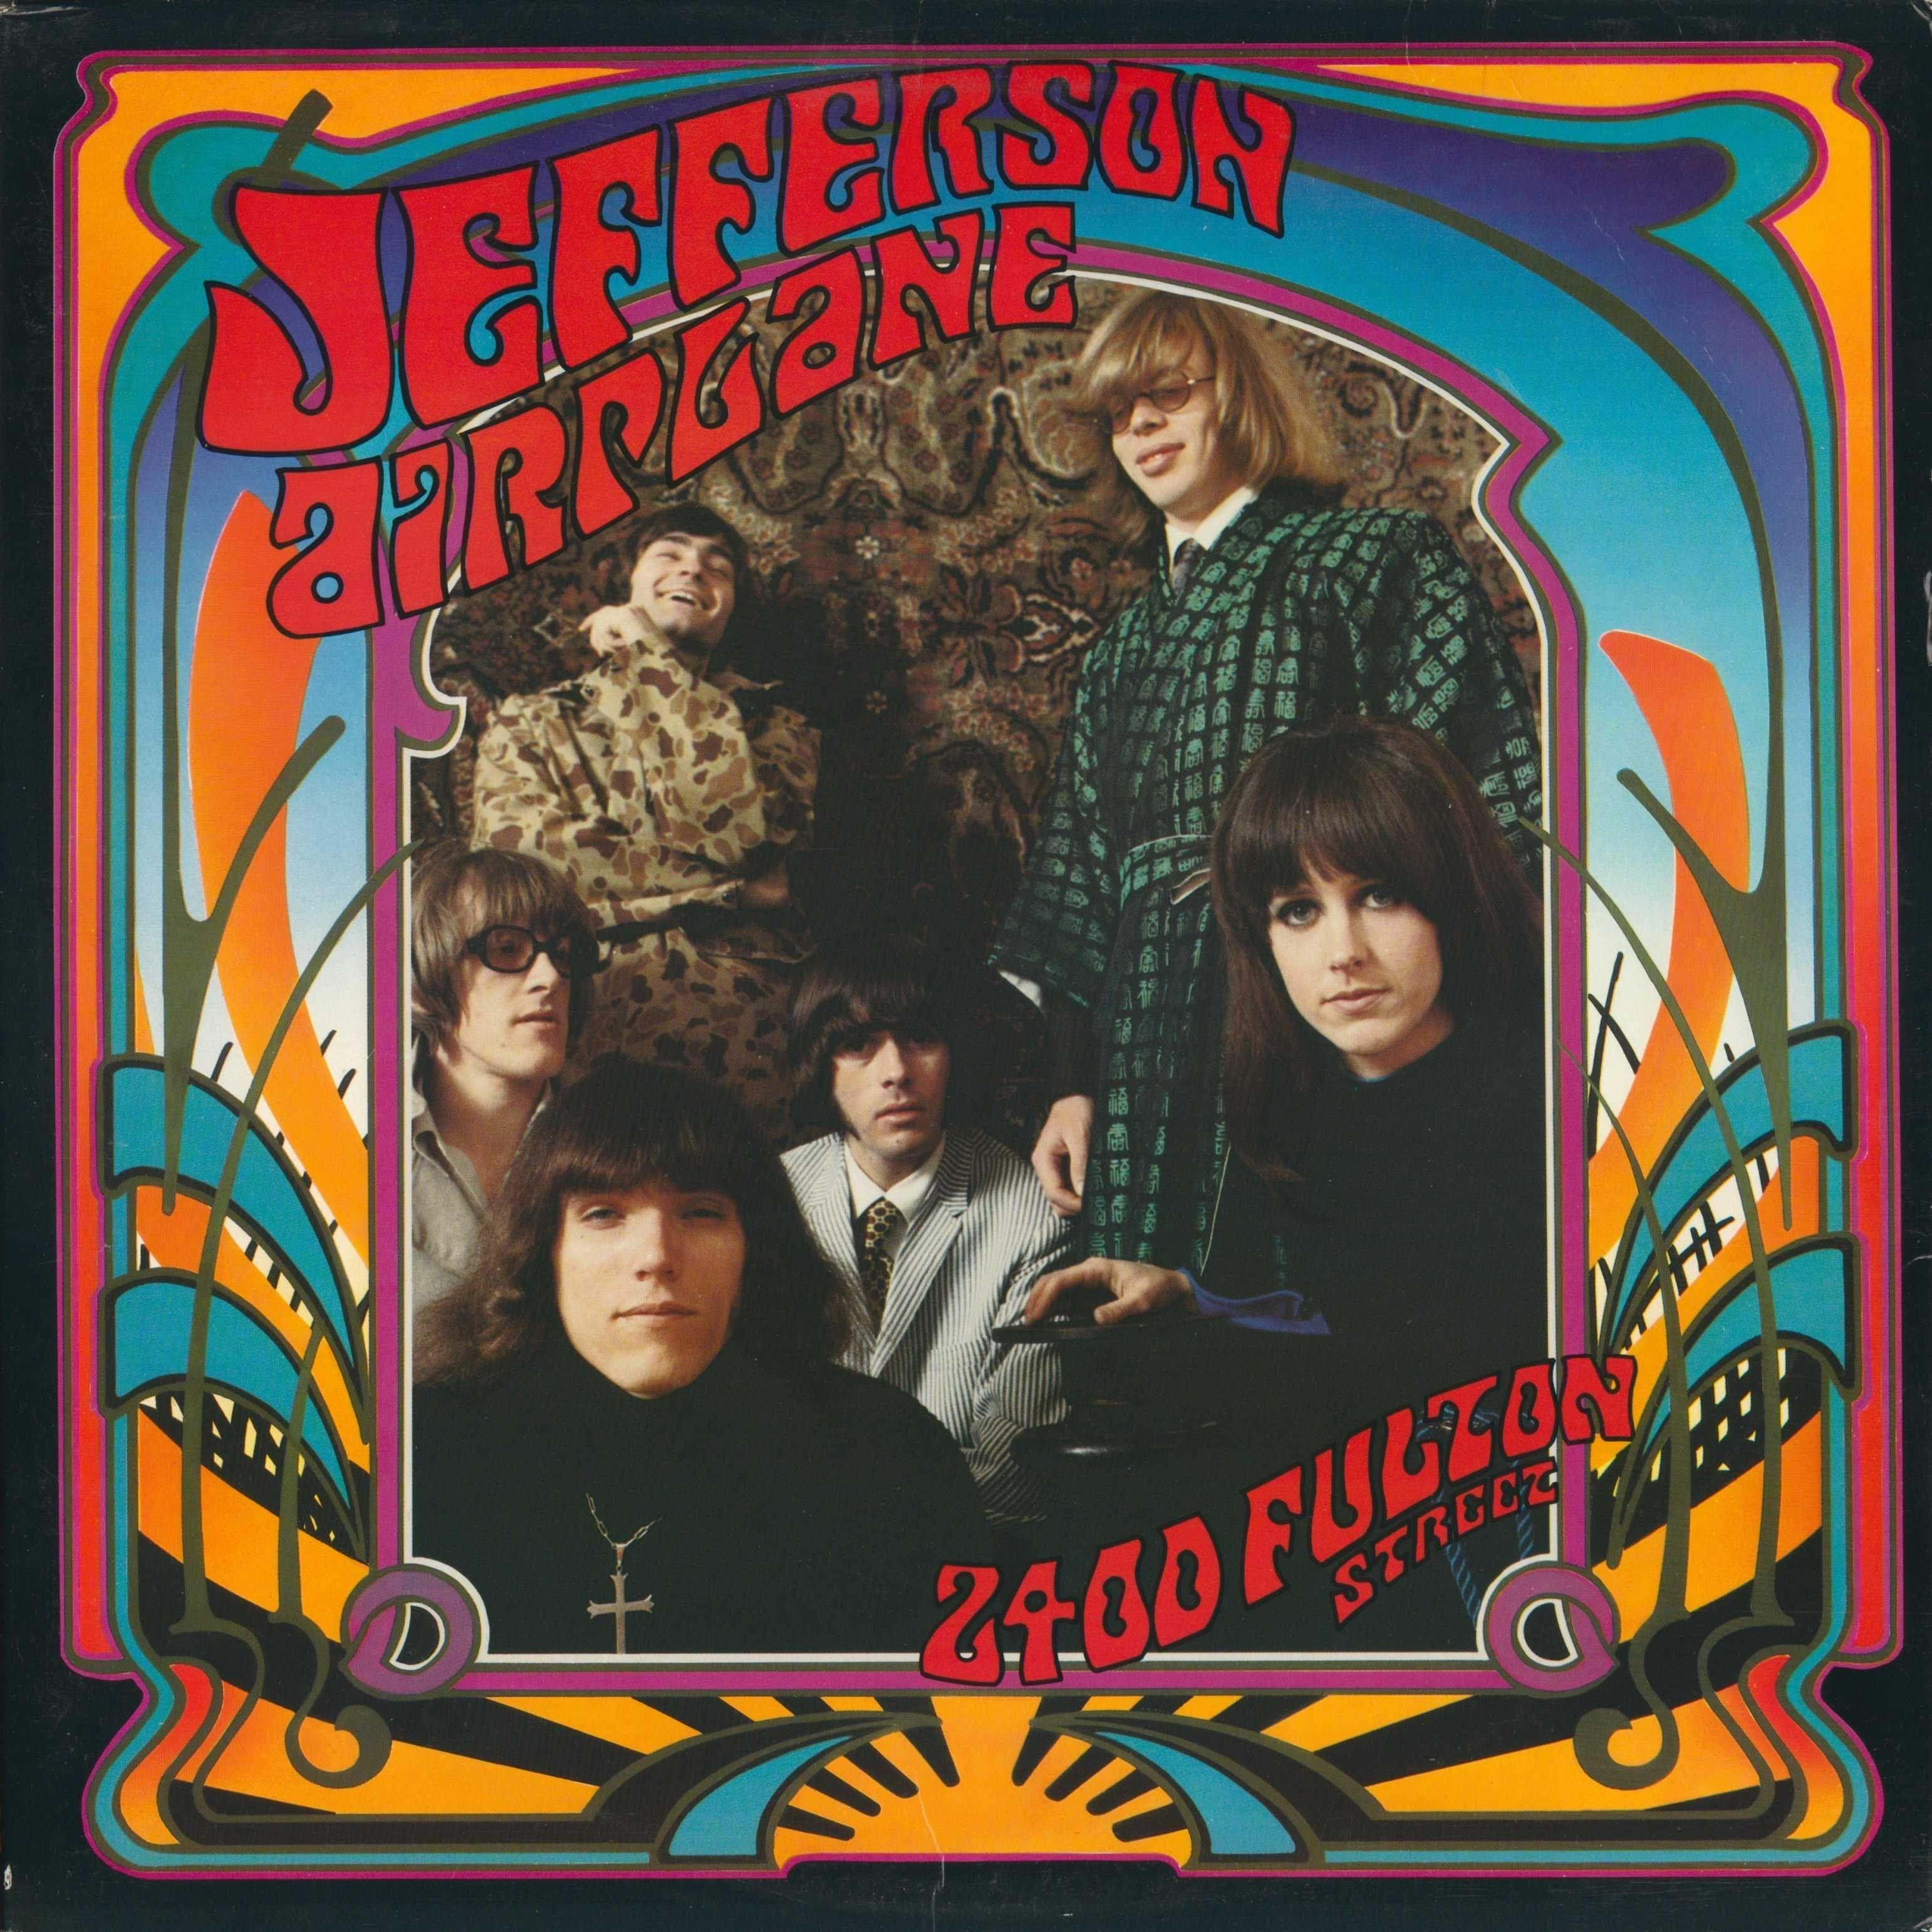 Jefferson Airplane. Known people people news and biographies